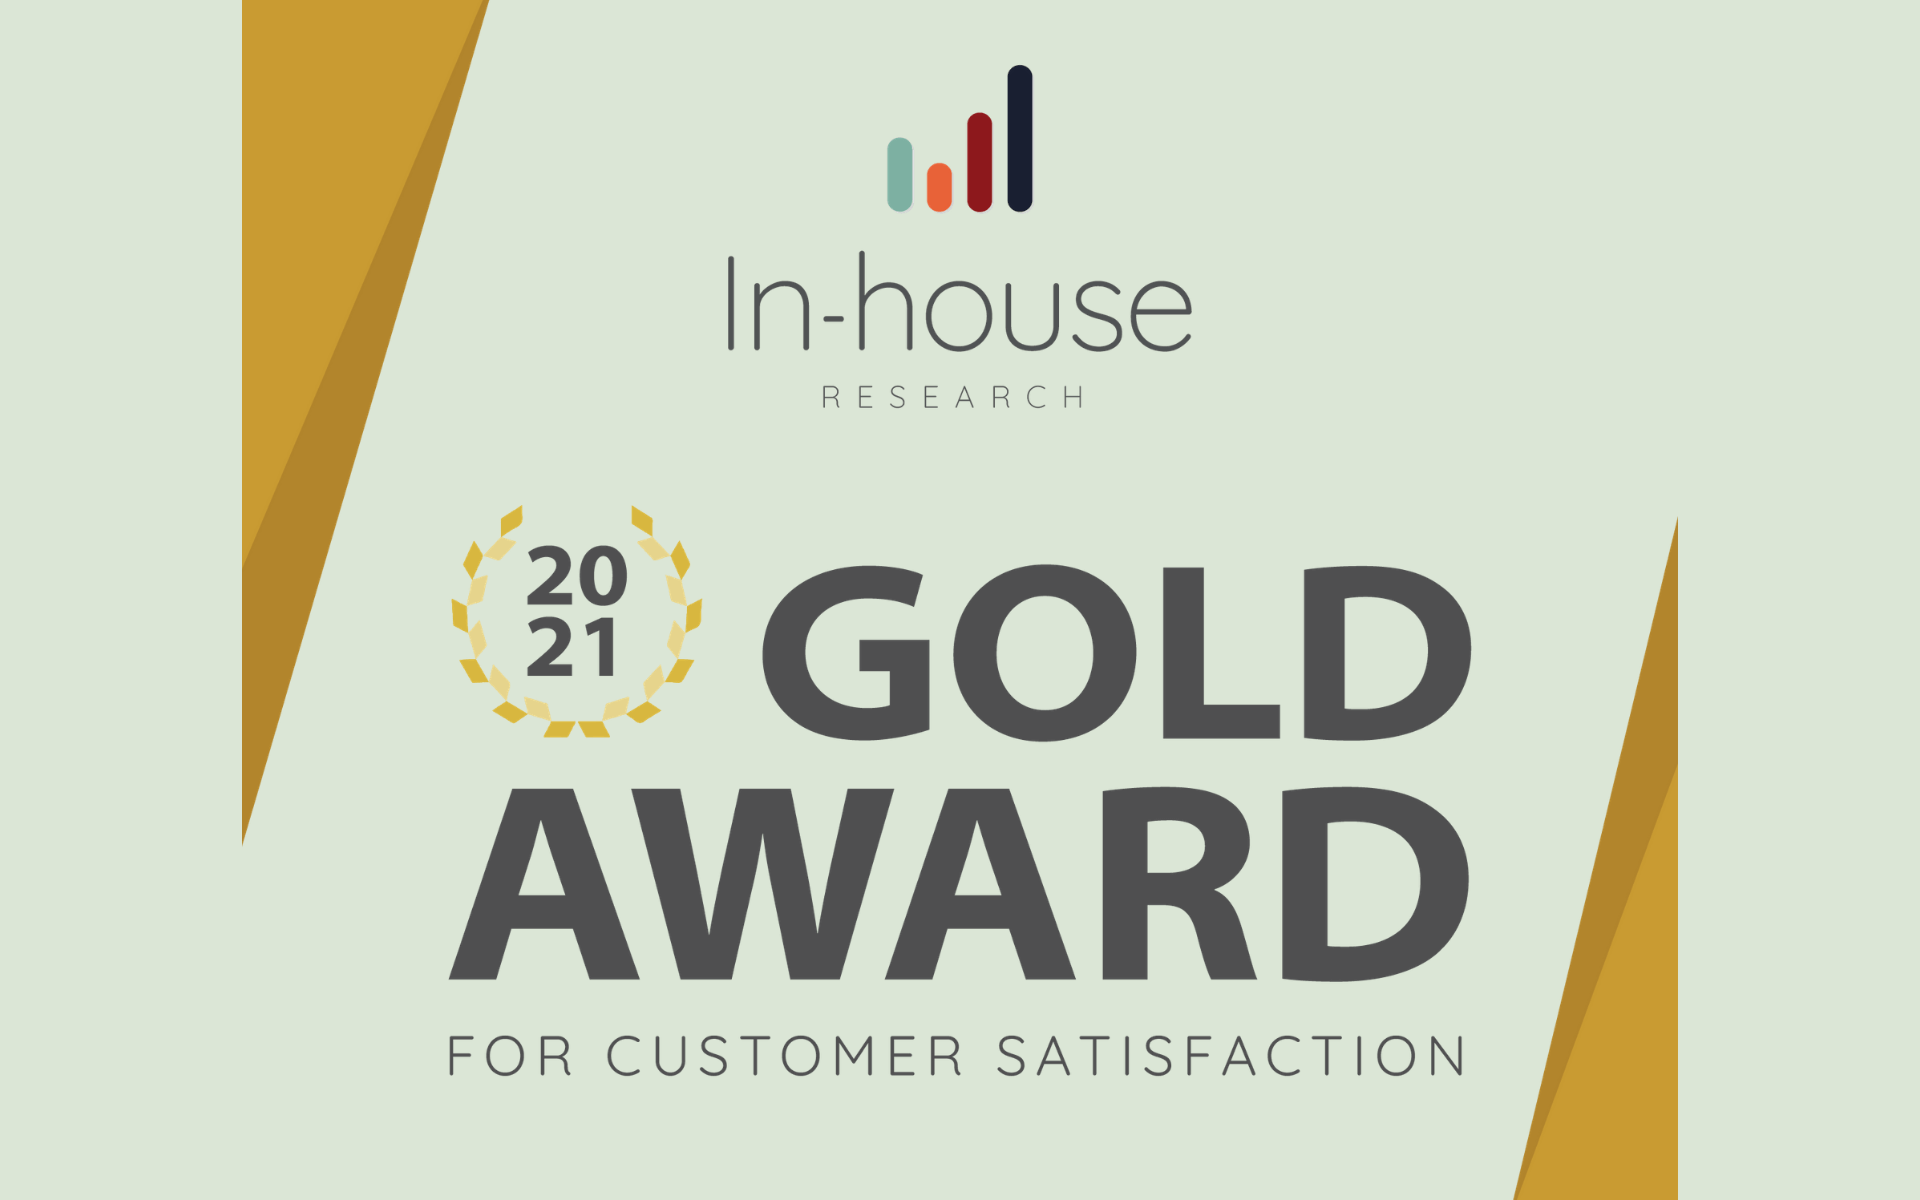 Orbit Homes achieves double gold award for customer satisfaction